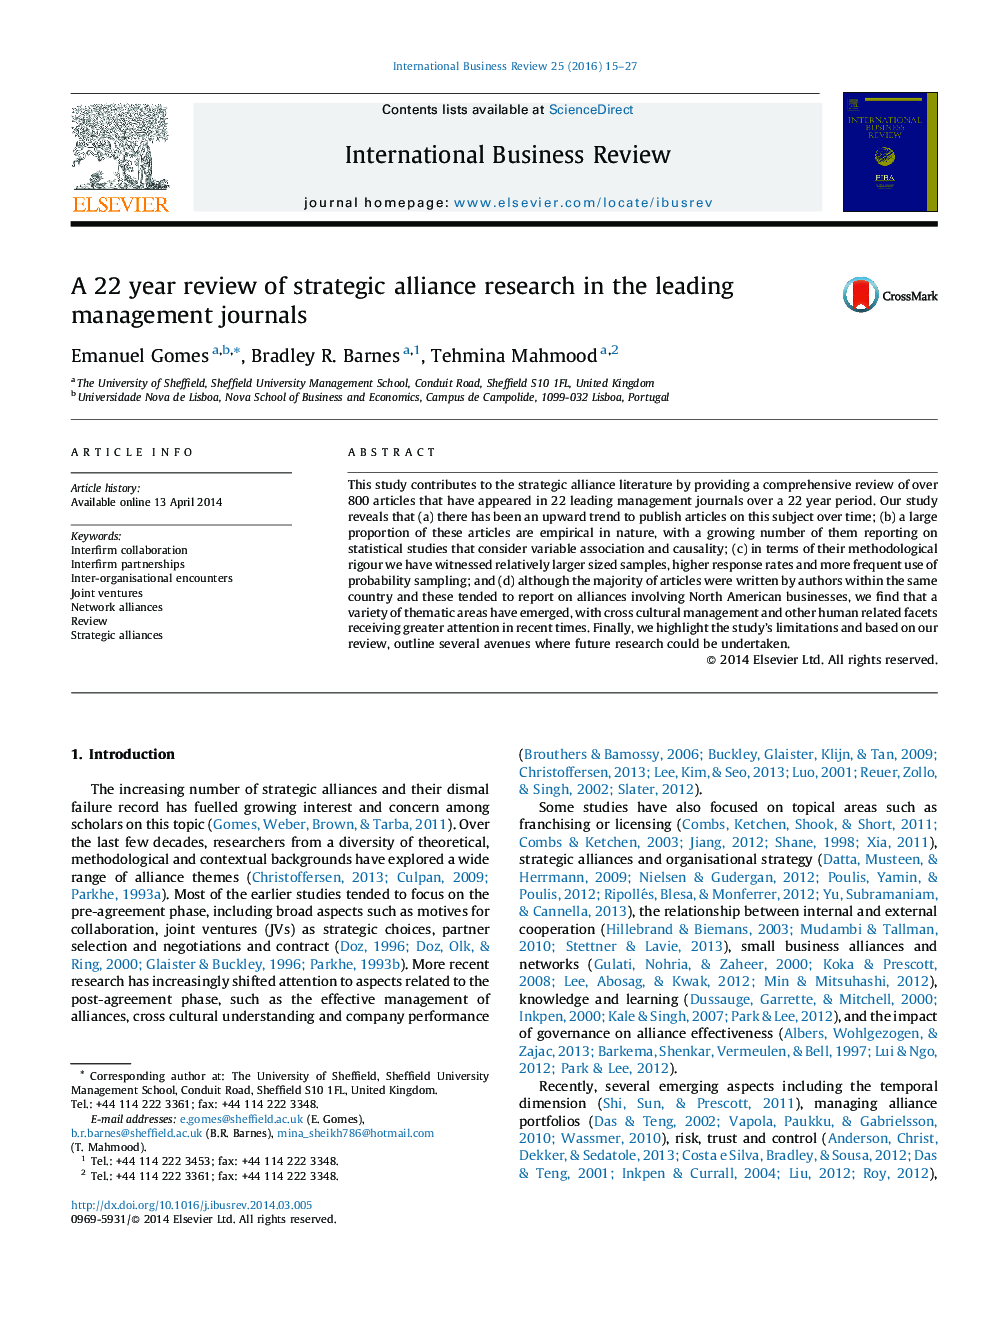 A 22 year review of strategic alliance research in the leading management journals